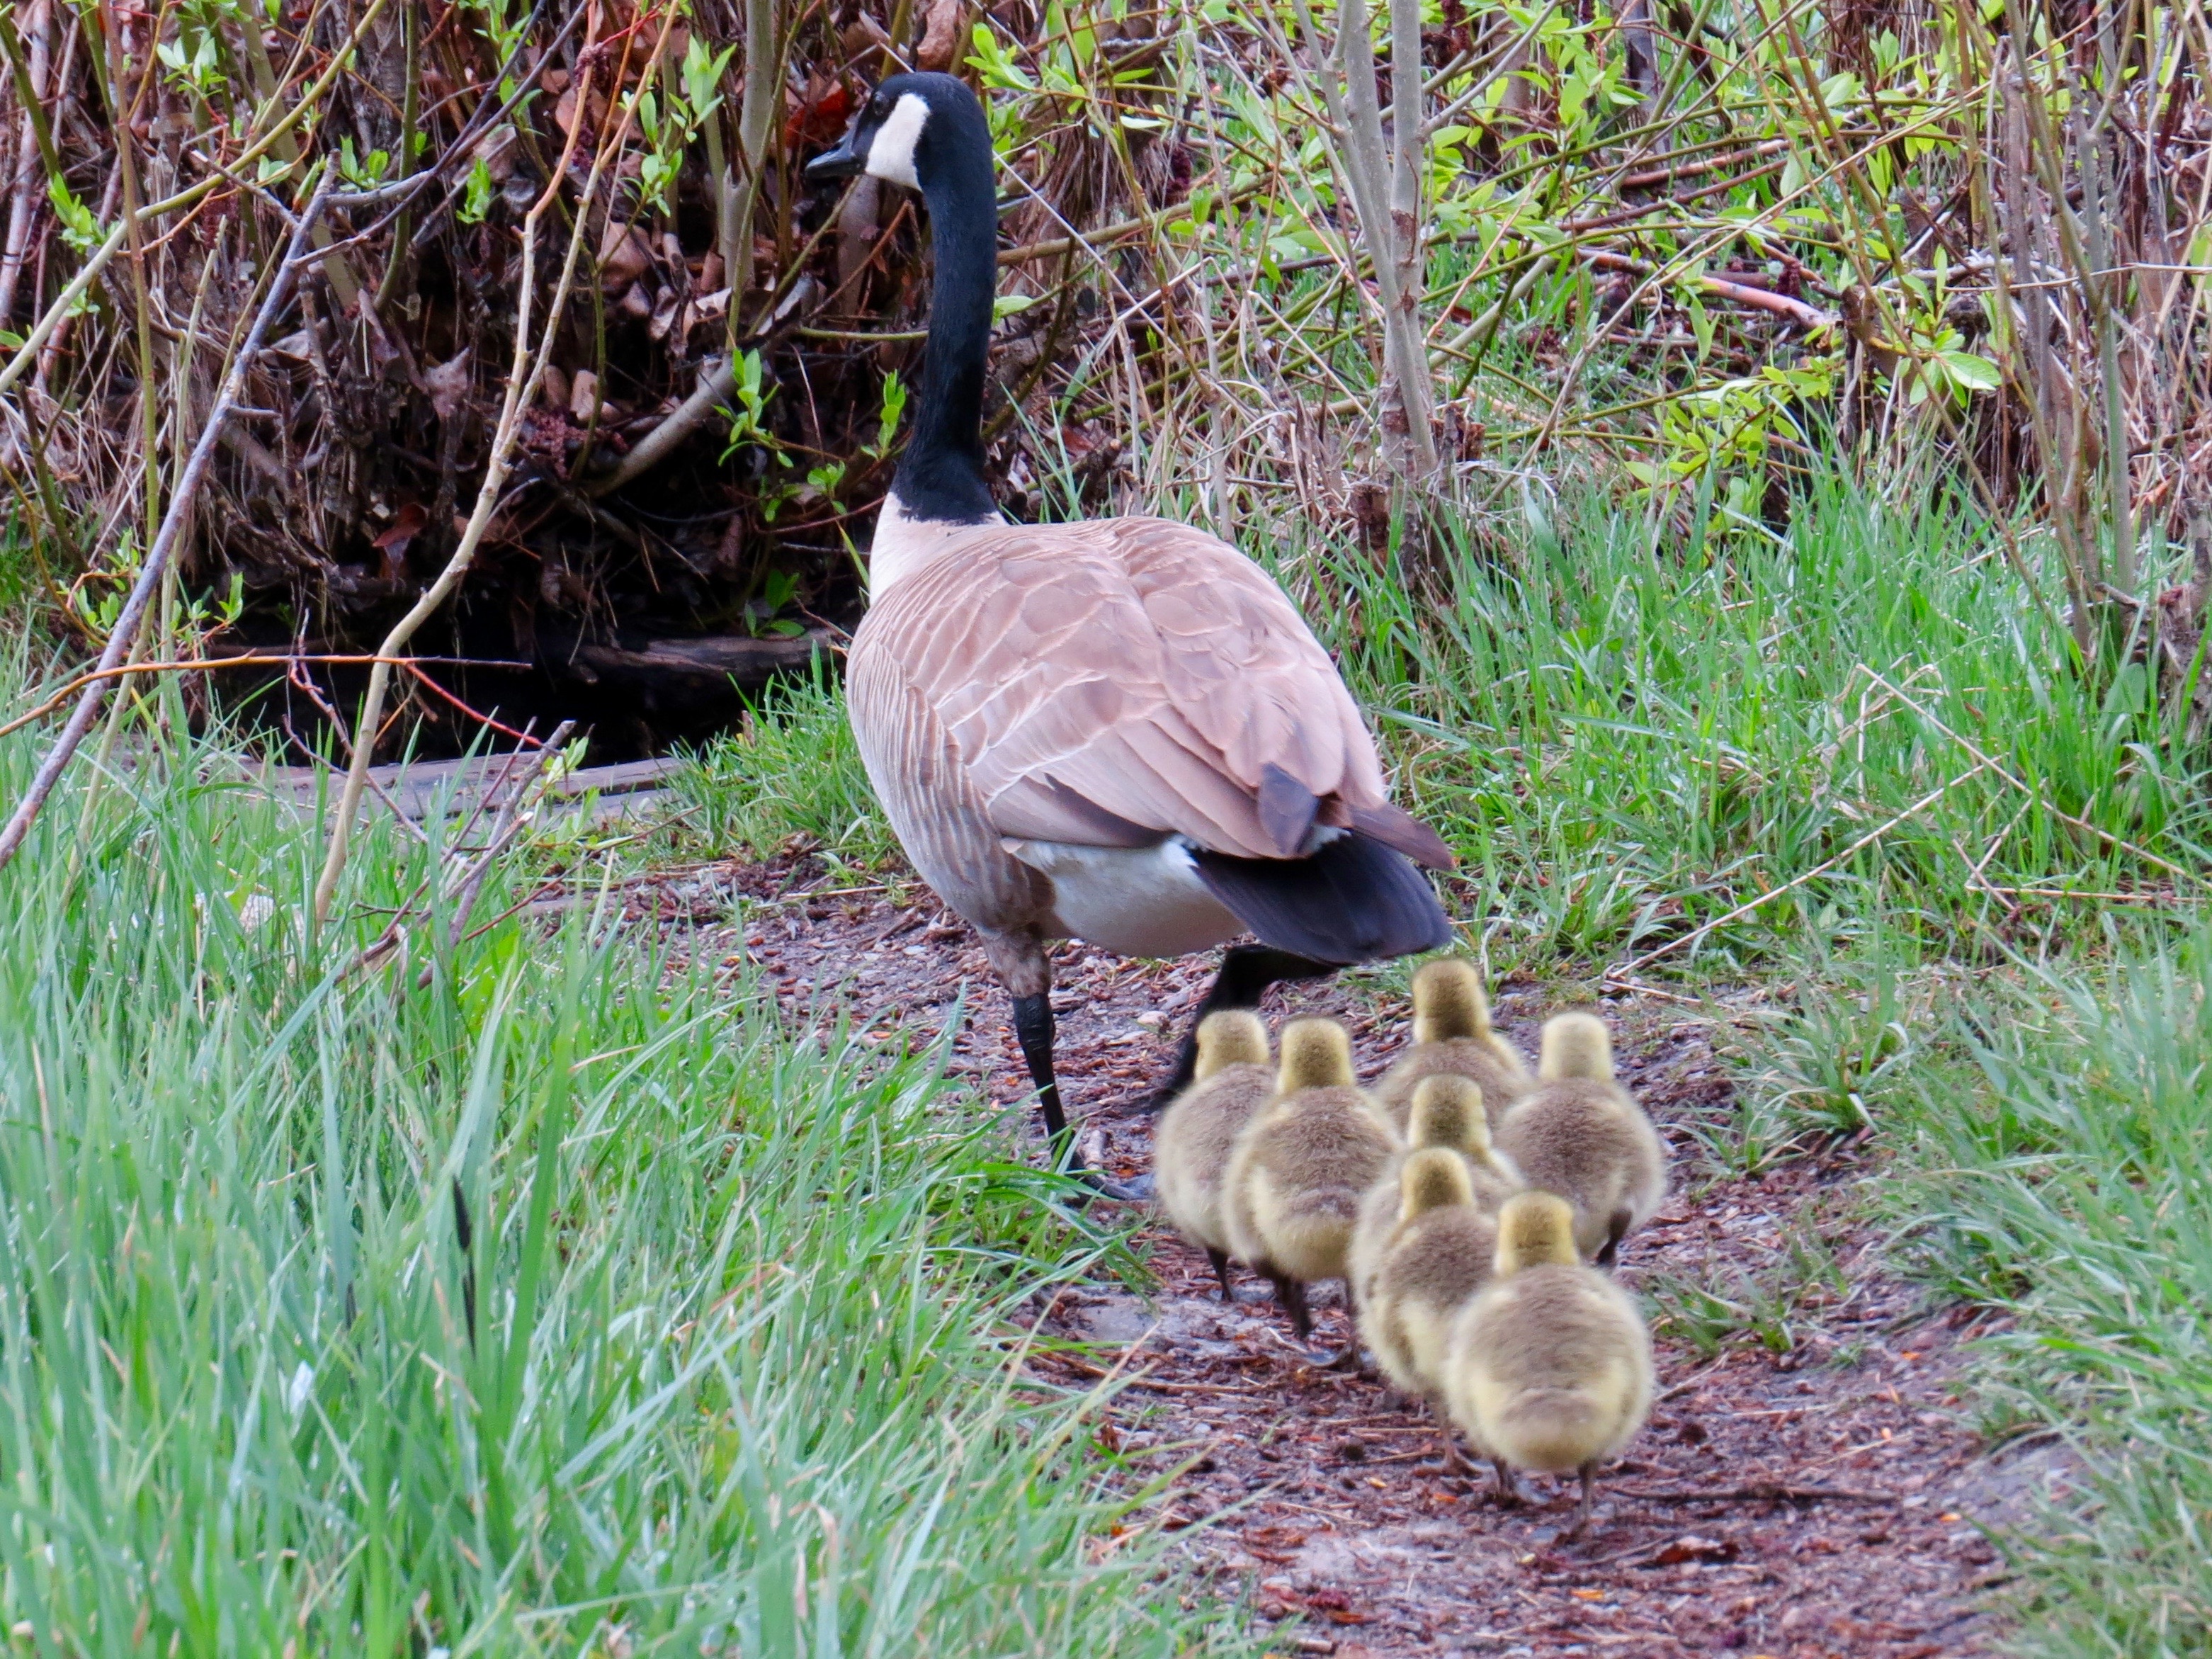 It's Springtime in the Rockies and time for babies. Mama Canada Goose is taking loving care of her 7 little goslings at the Aspen Center for Environmental Studies.